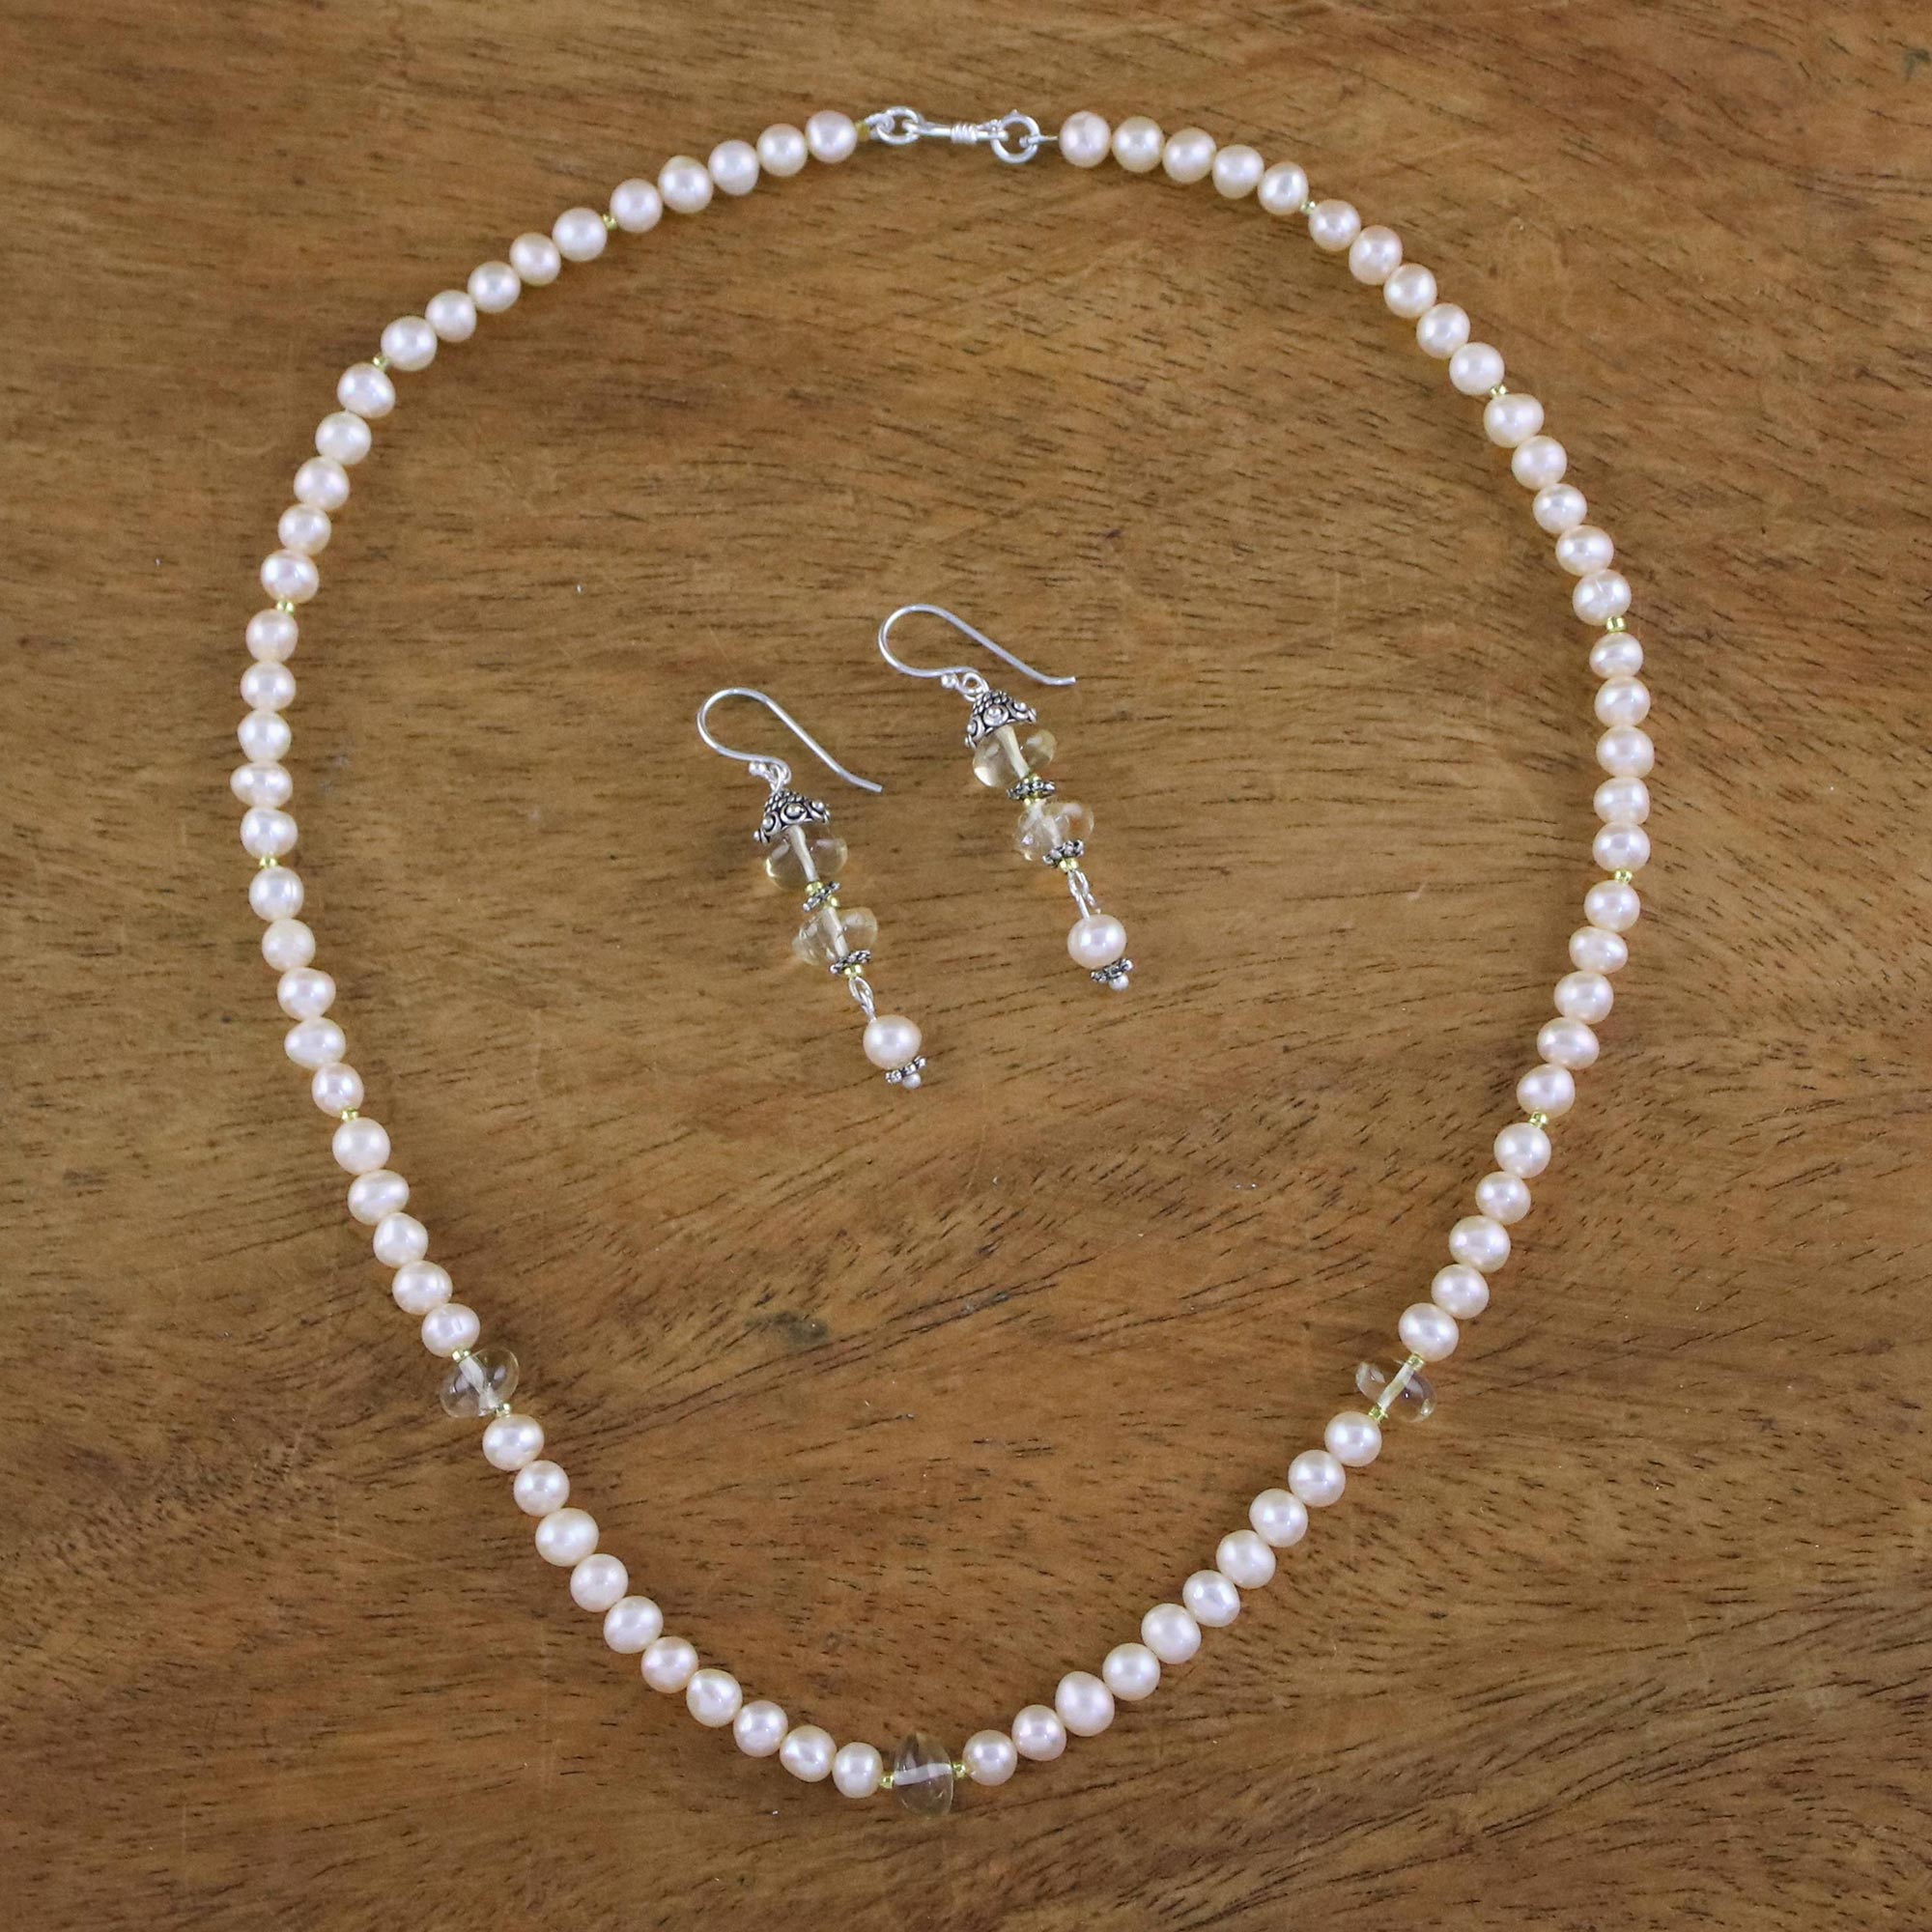 Pearl Earrings and Necklace Jewelry Set - Pink Lemons | NOVICA